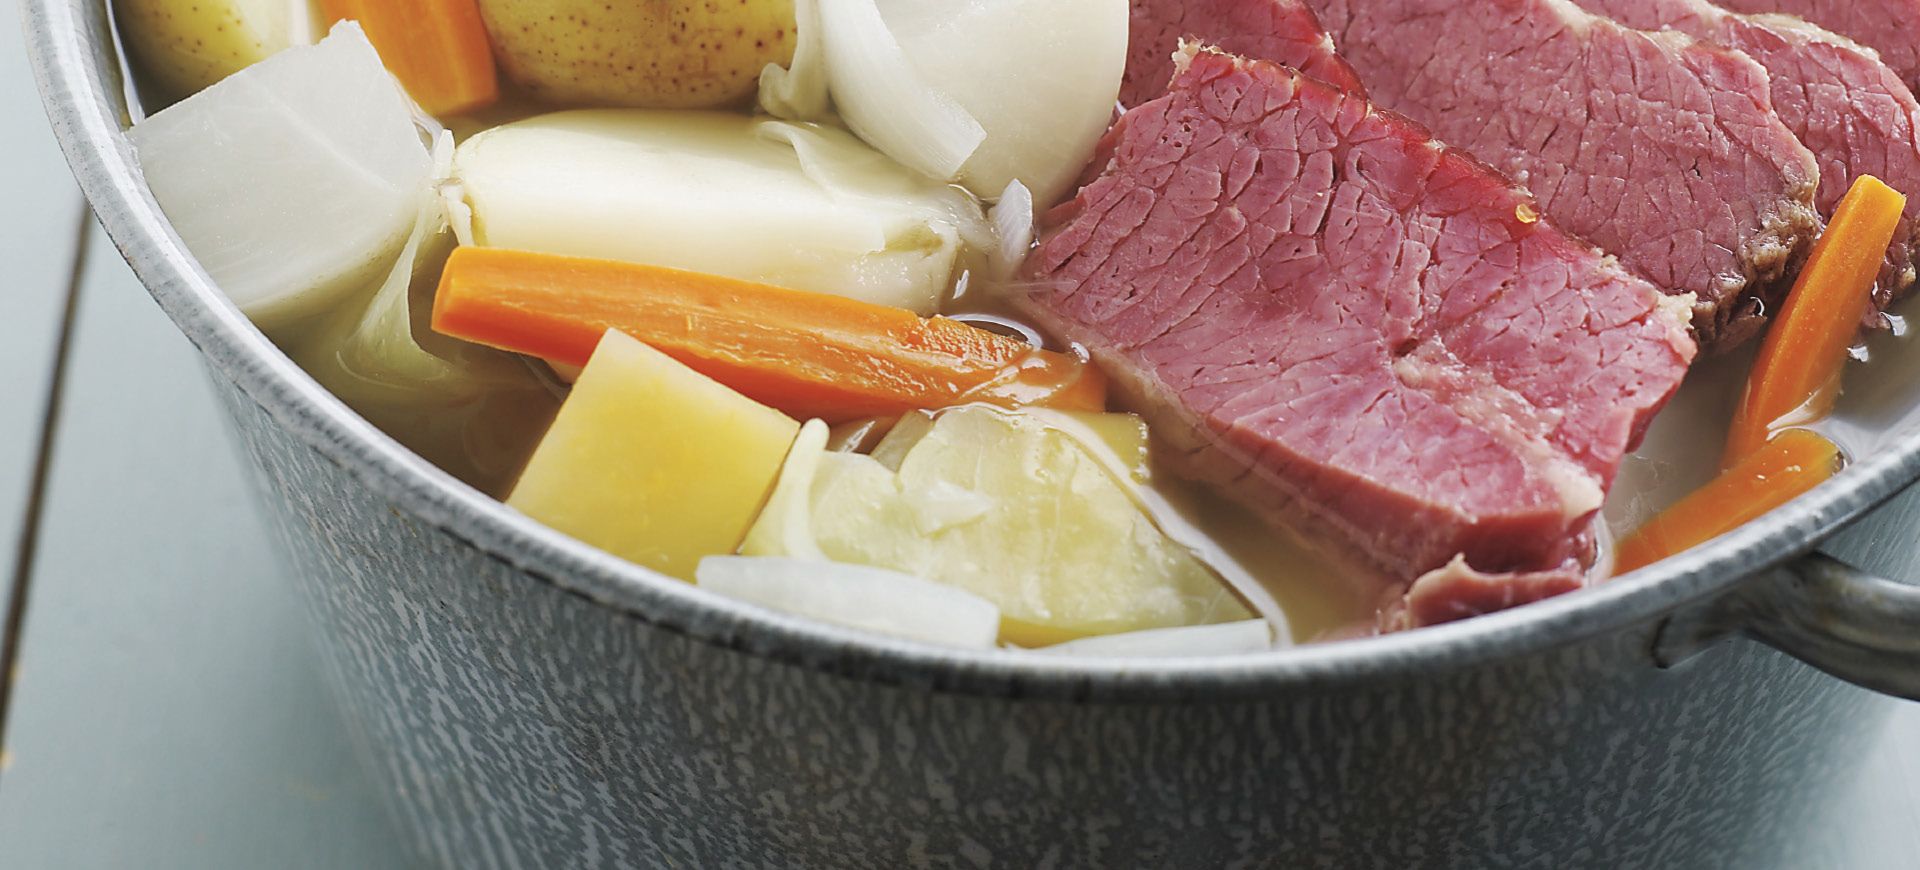 Brown Sugar and Mustard Glazed Corned Beef with Vegetables